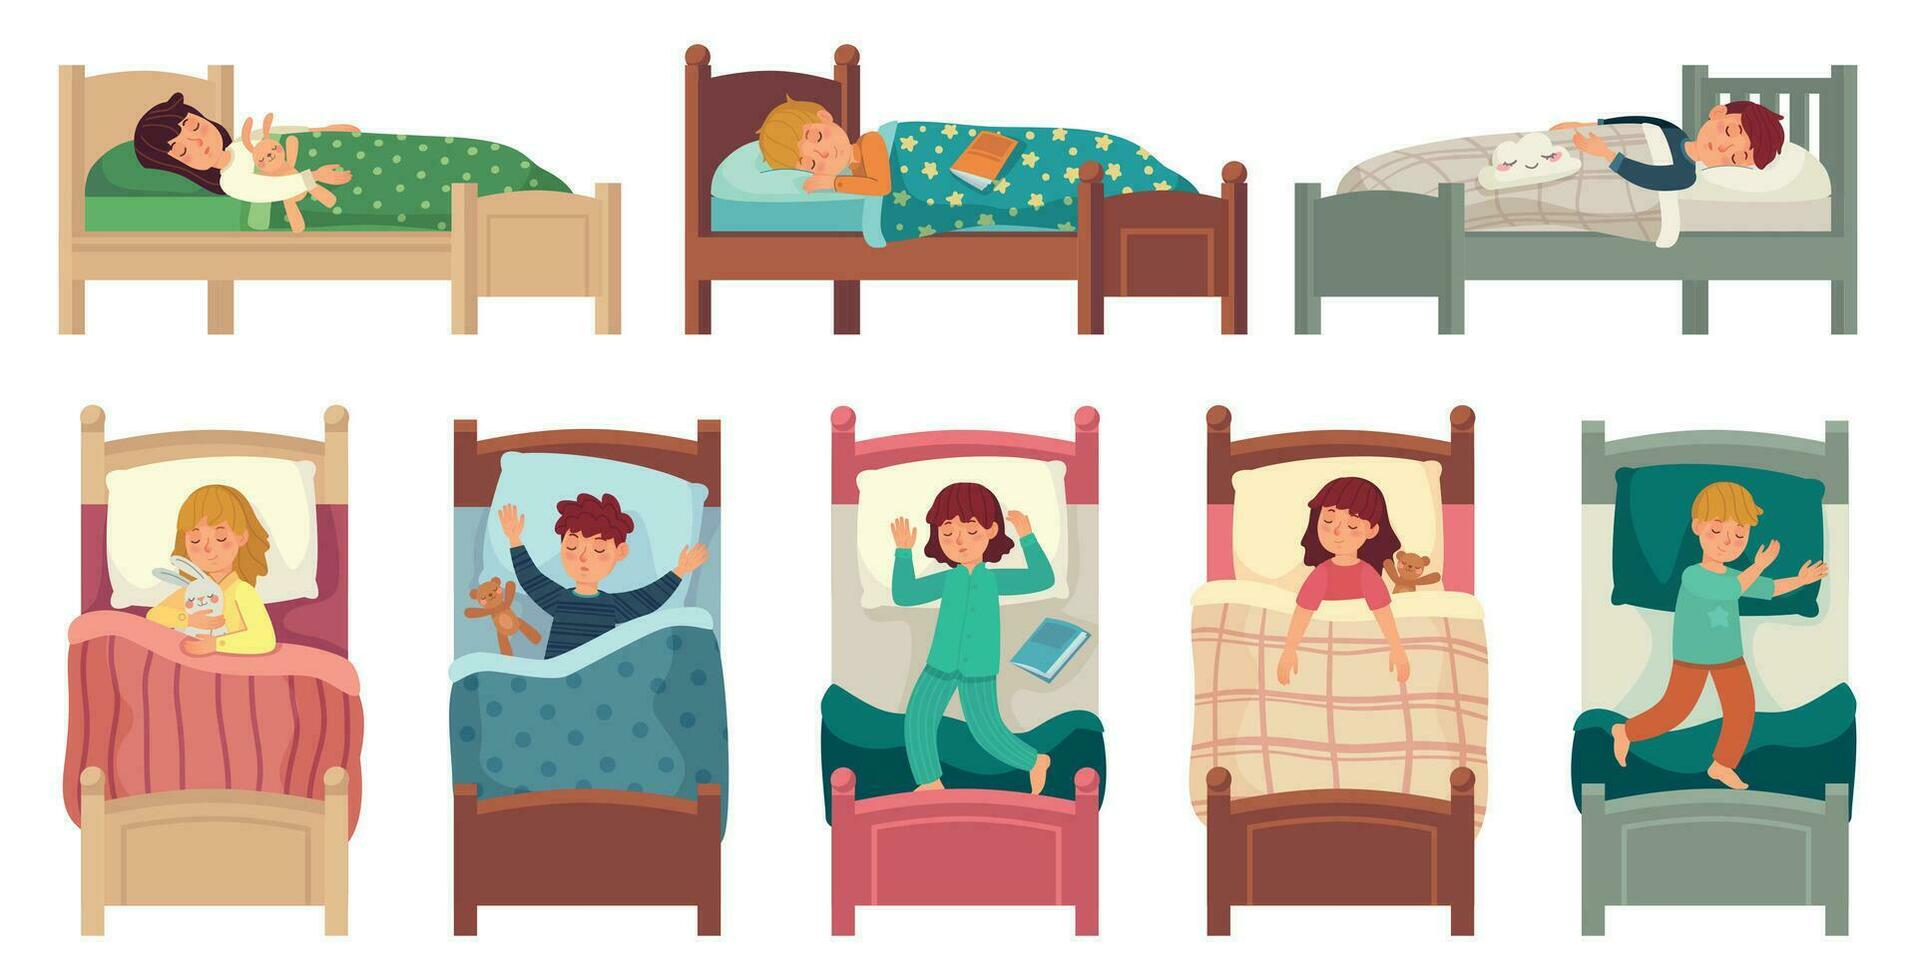 Kids sleeping in beds. Child sleeps in bed on pillow, young boy and girl asleep. Bedtime vector illustration set